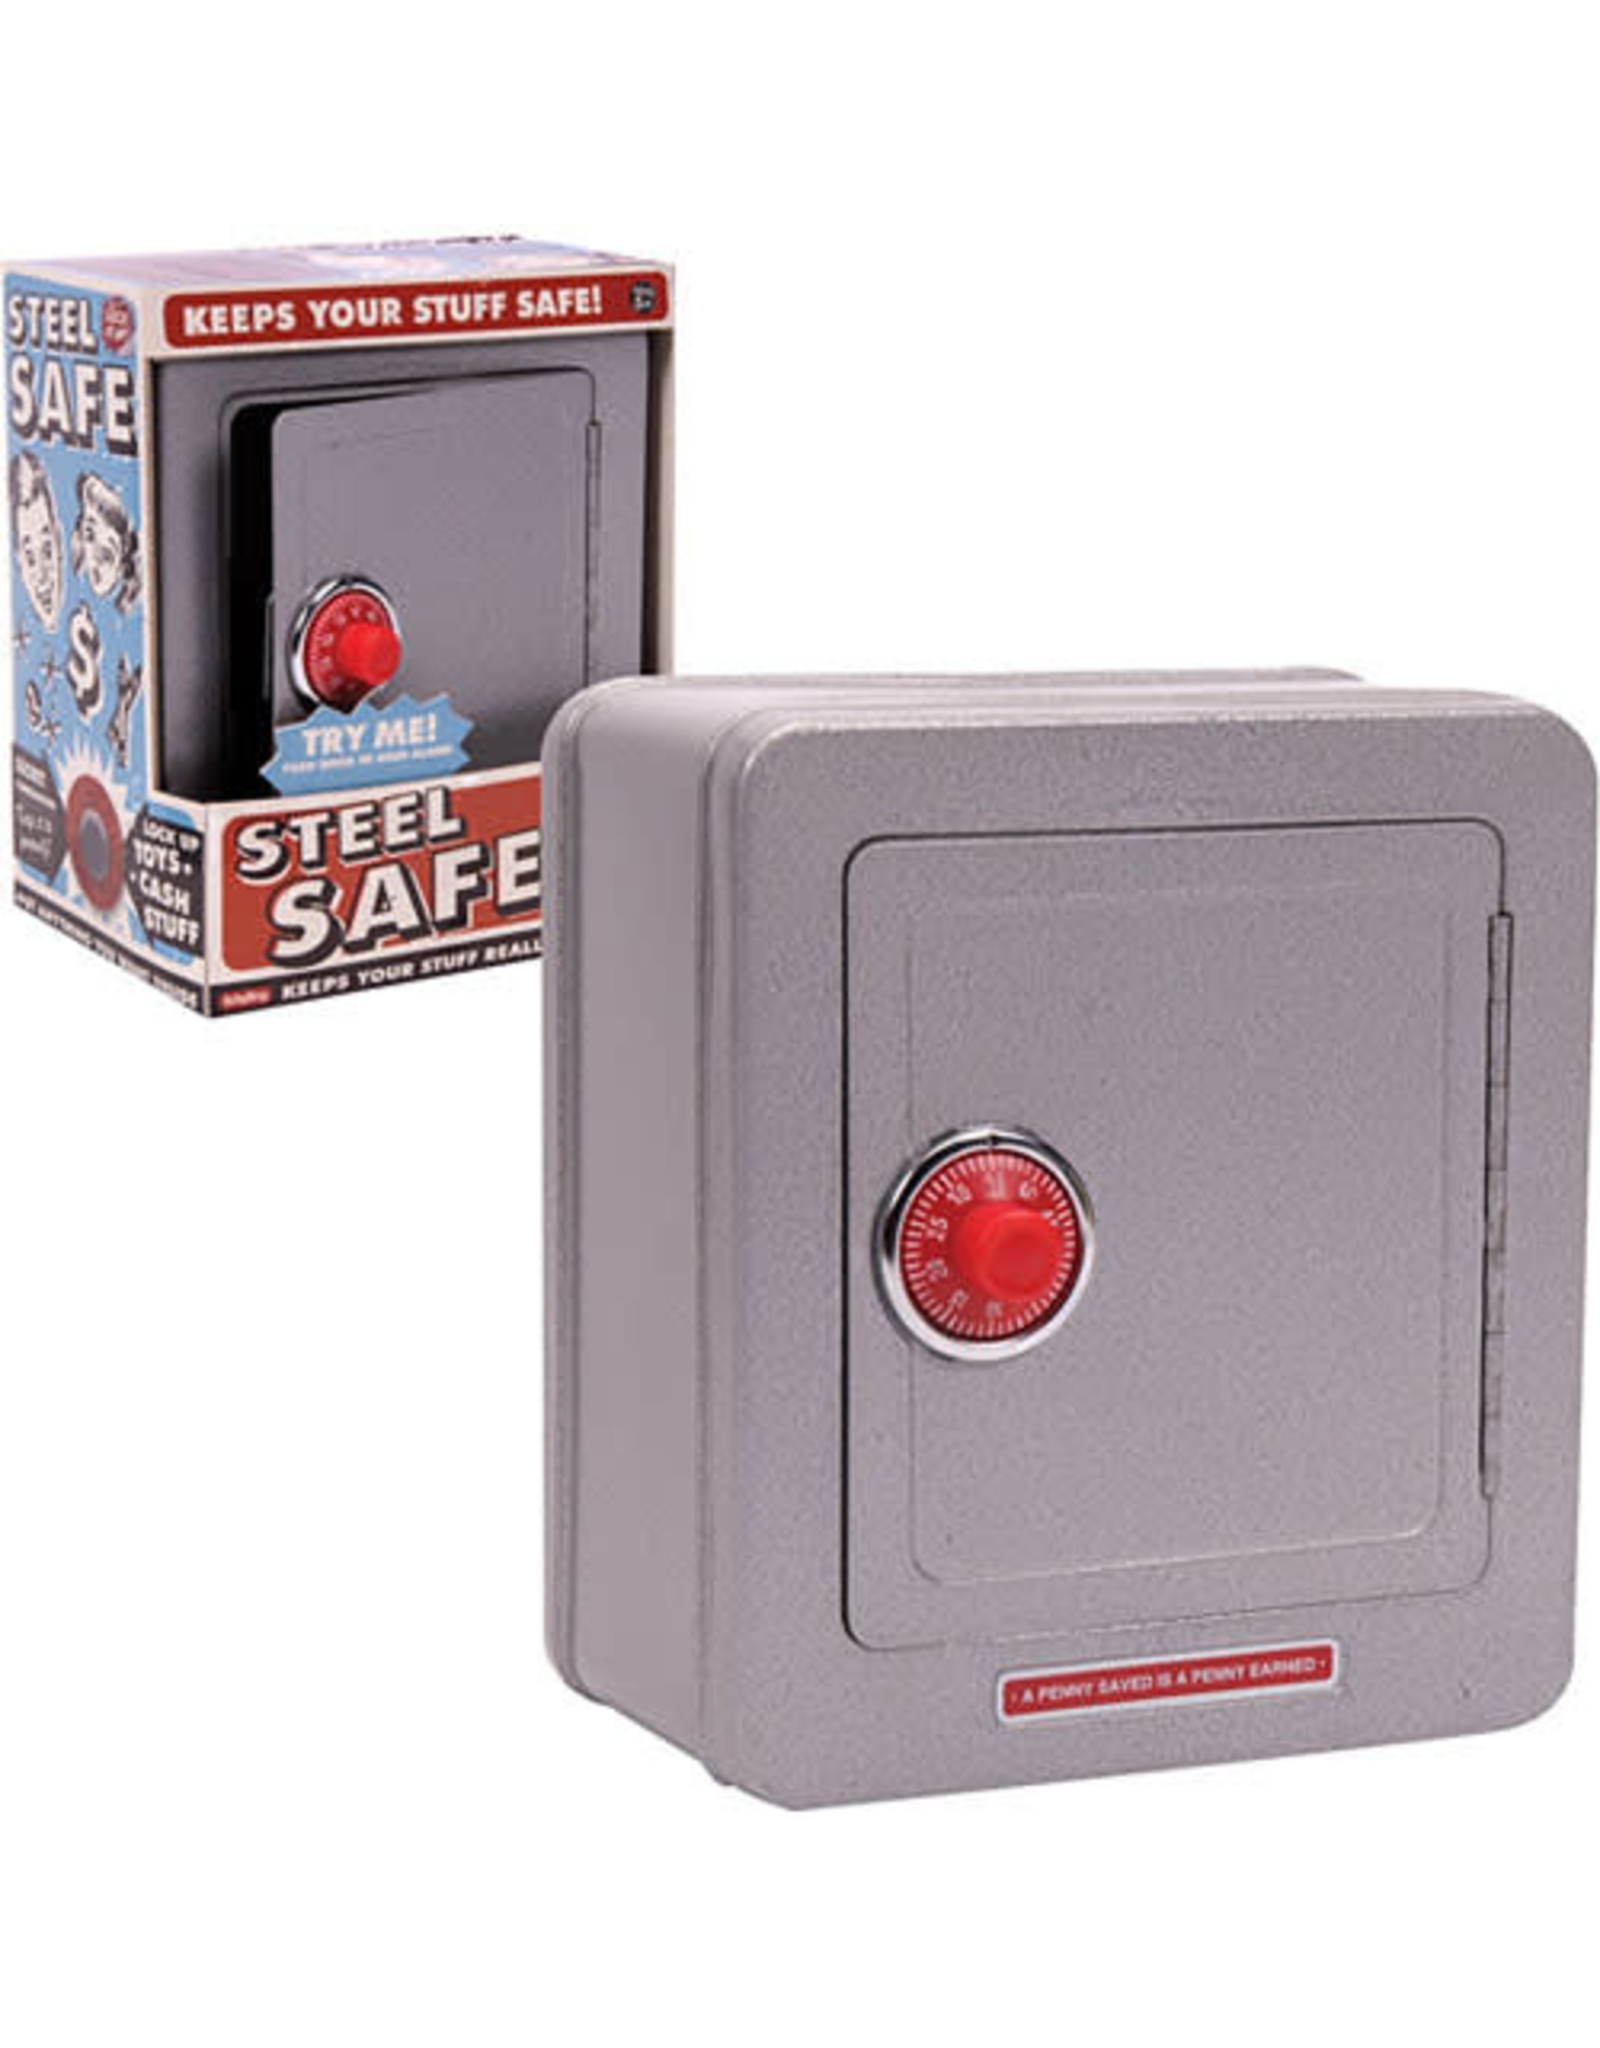 Steel Safe with Alarm 8.5"